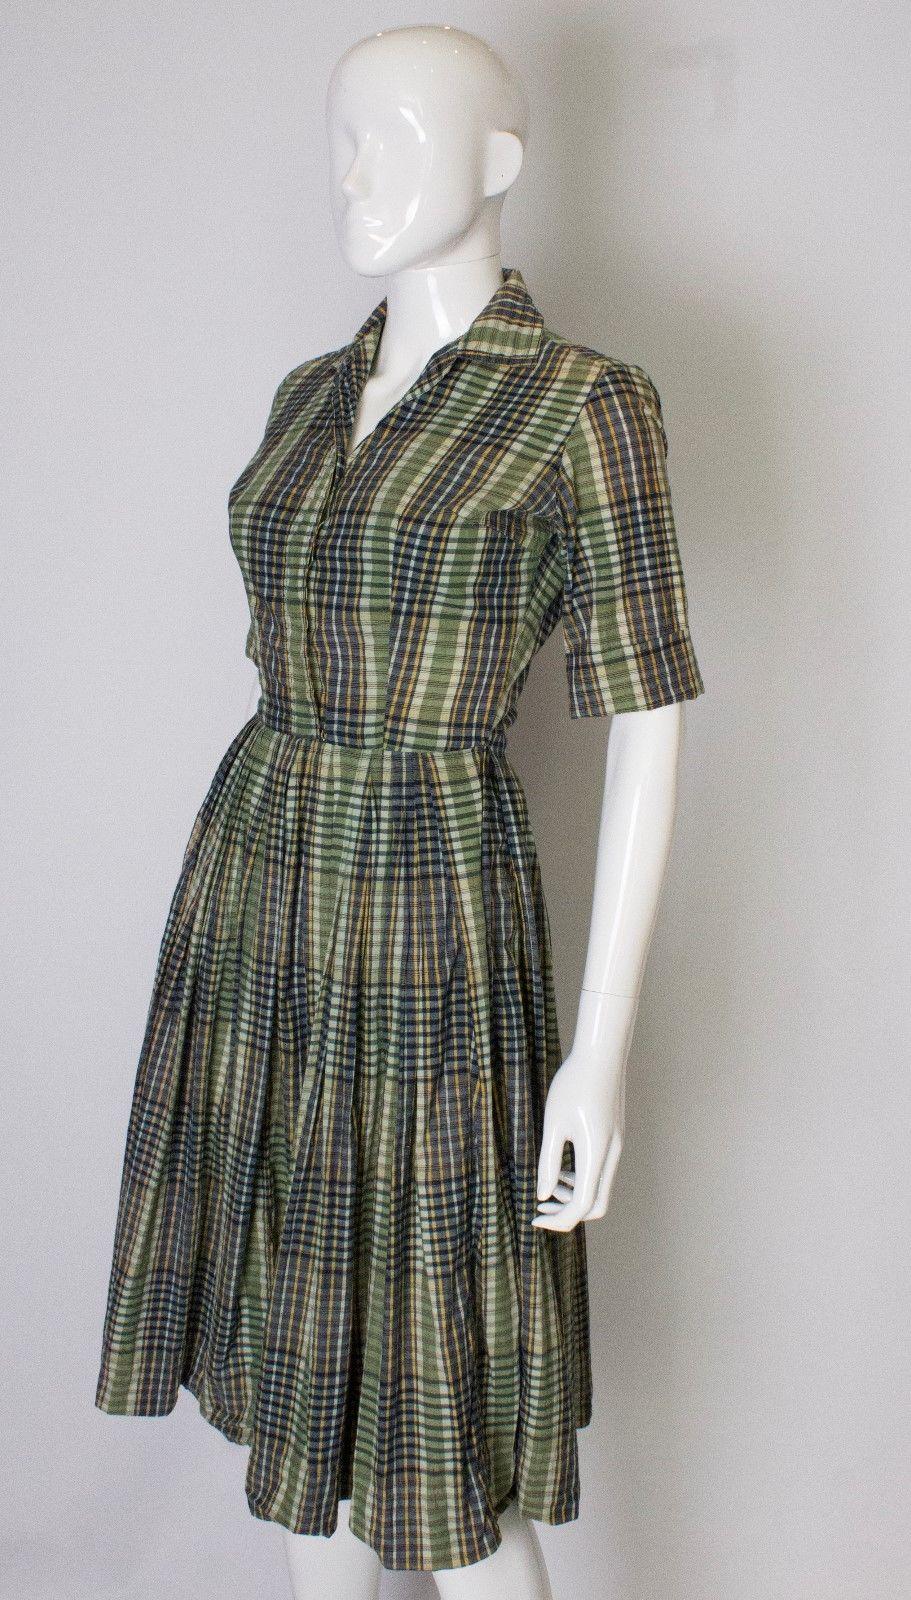 Gray A vintage 1950s gingham striped cotton day dress by Neiman Marcus